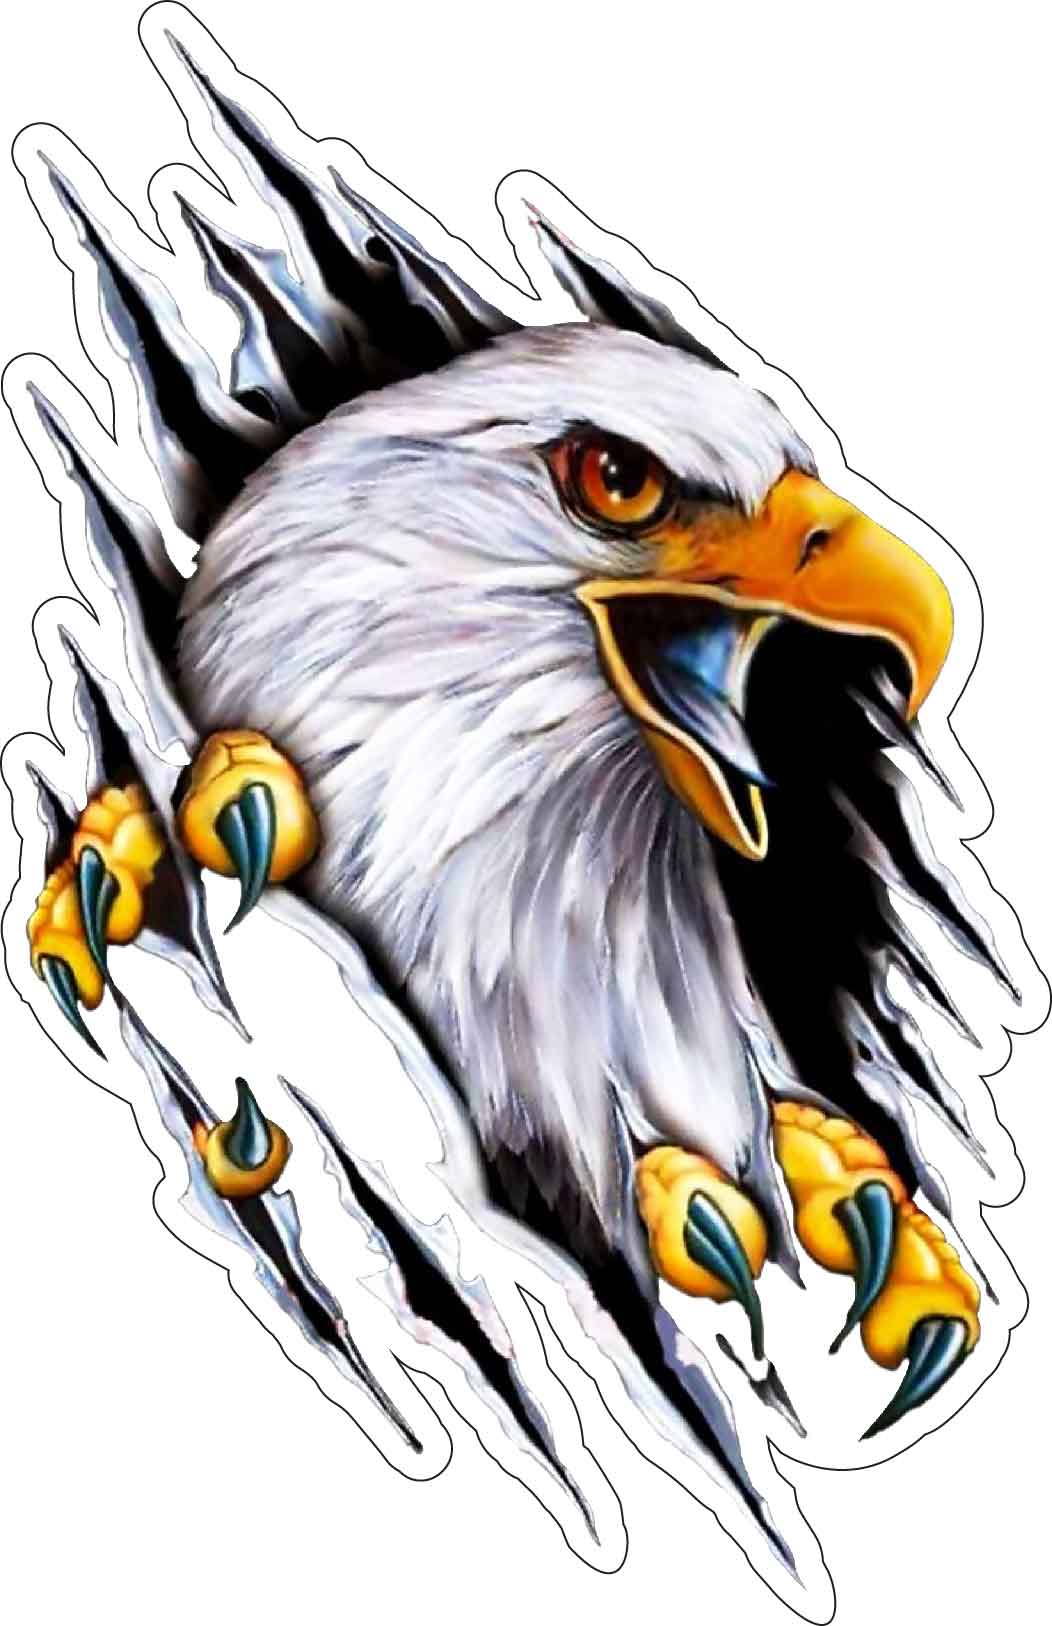 White King Eagle Ferocious Sky Dominator Tearing Through Heavens With Mighty Sharp Claws Vinyl Sticker